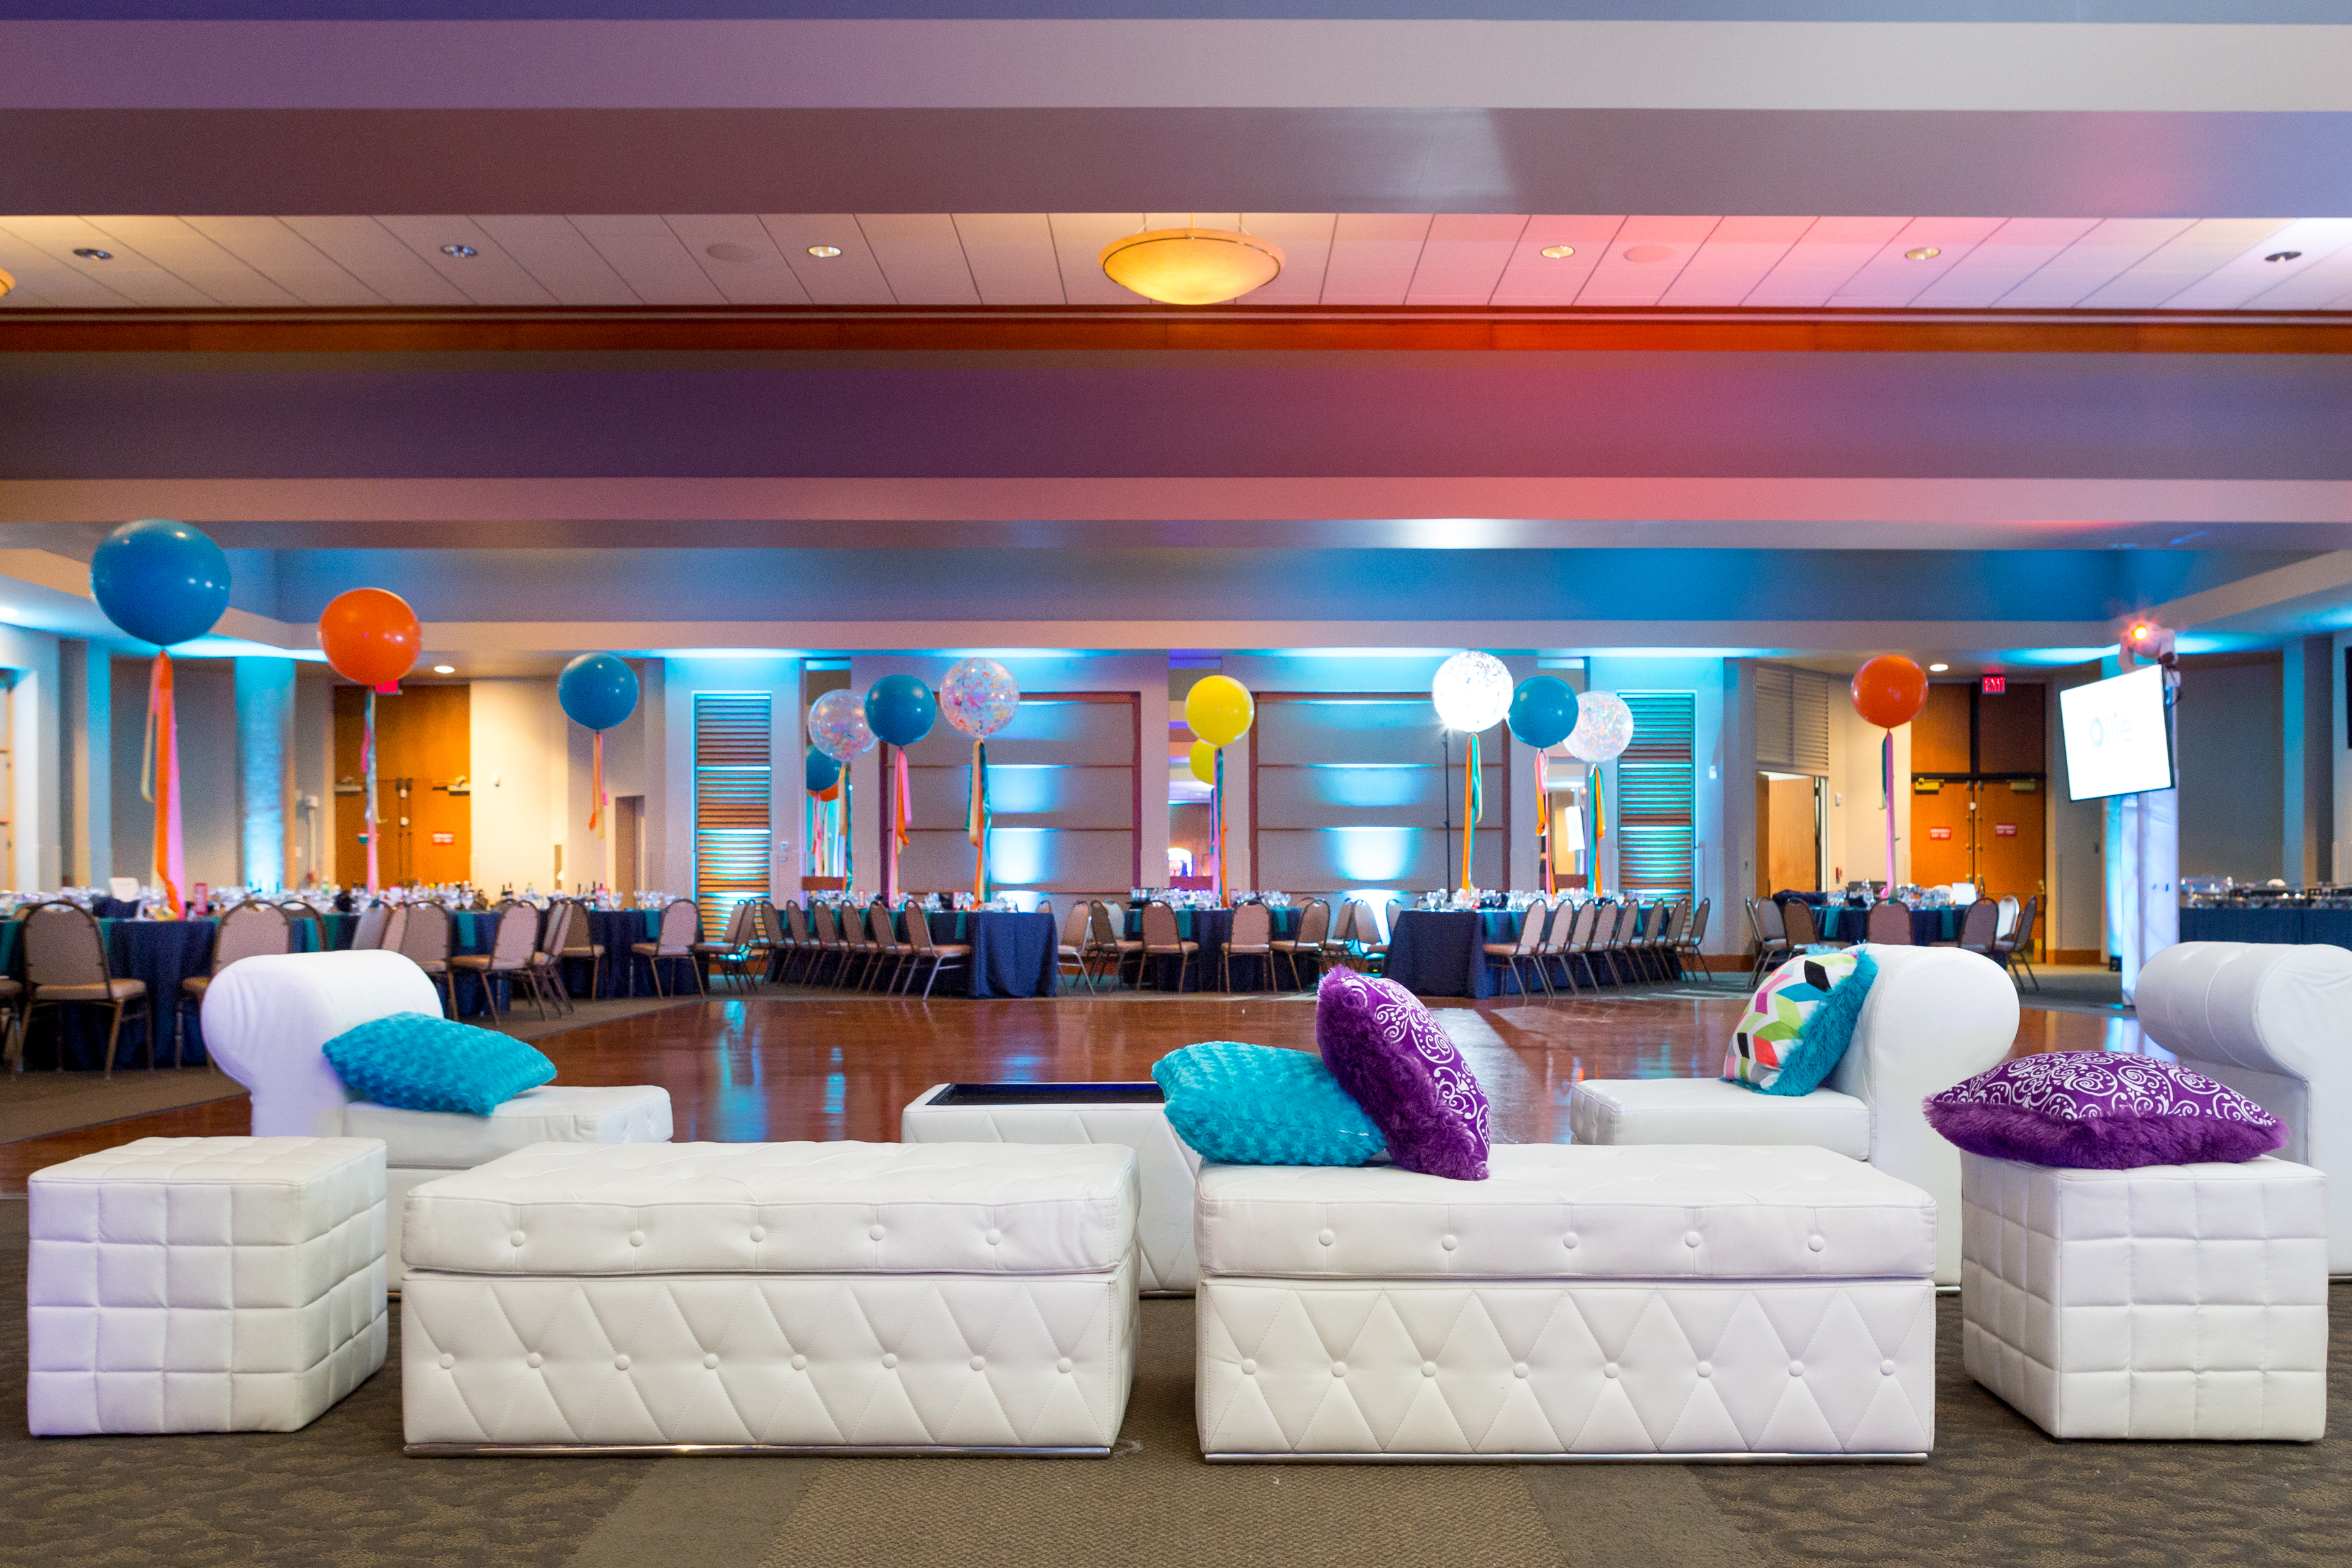 Oliver's Bar Mitzvah lounge at B'nai Israel in Rockville, MD | Pop Color Events | Adding a Pop of Color to Bar & Bat Mitzvahs in DC, MD & VA | Photo by Jessica Latos Photography